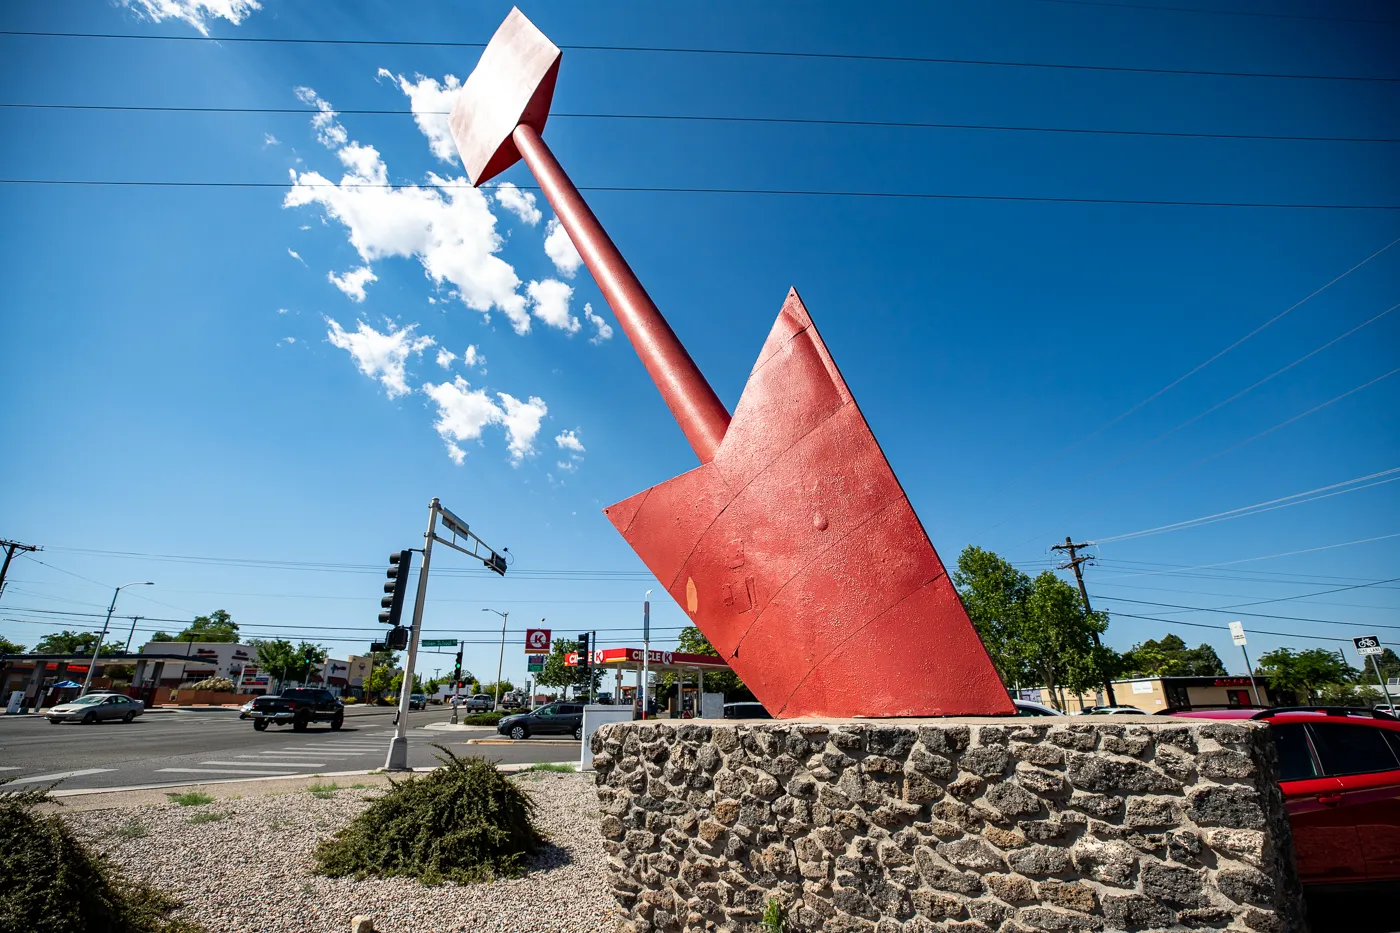 Giant Red Arrow in Albuquerque, New Mexico Roadside Attraction